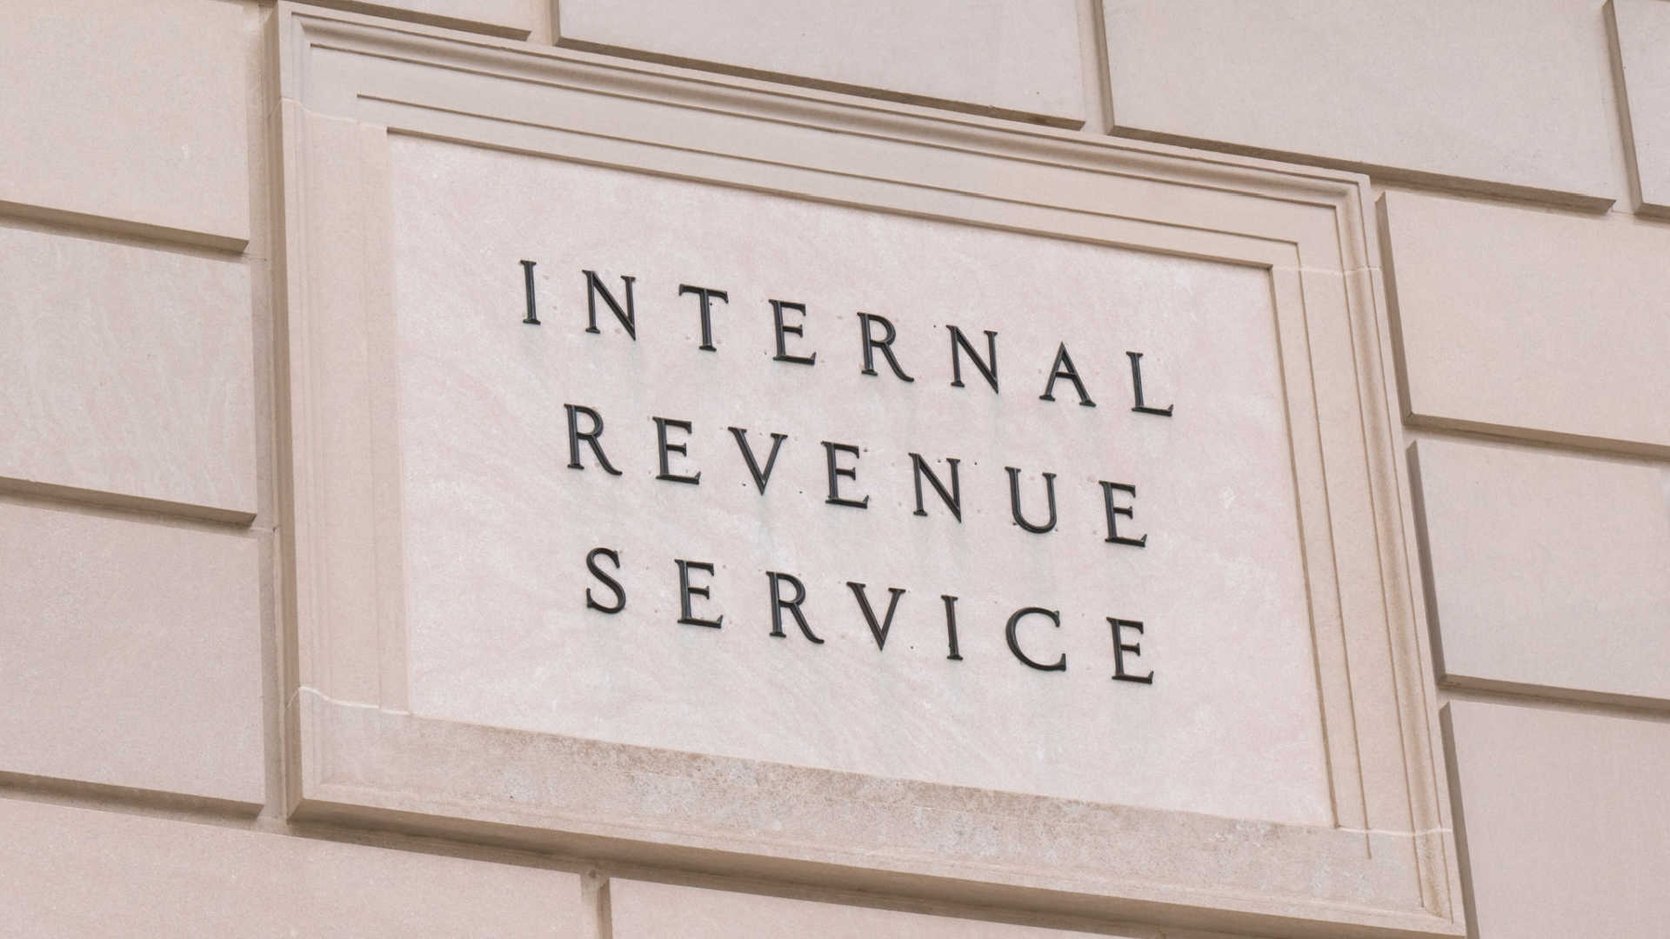 2023 IRS Limits for HSA, FSA, 401k, HDHP, and More Guide]